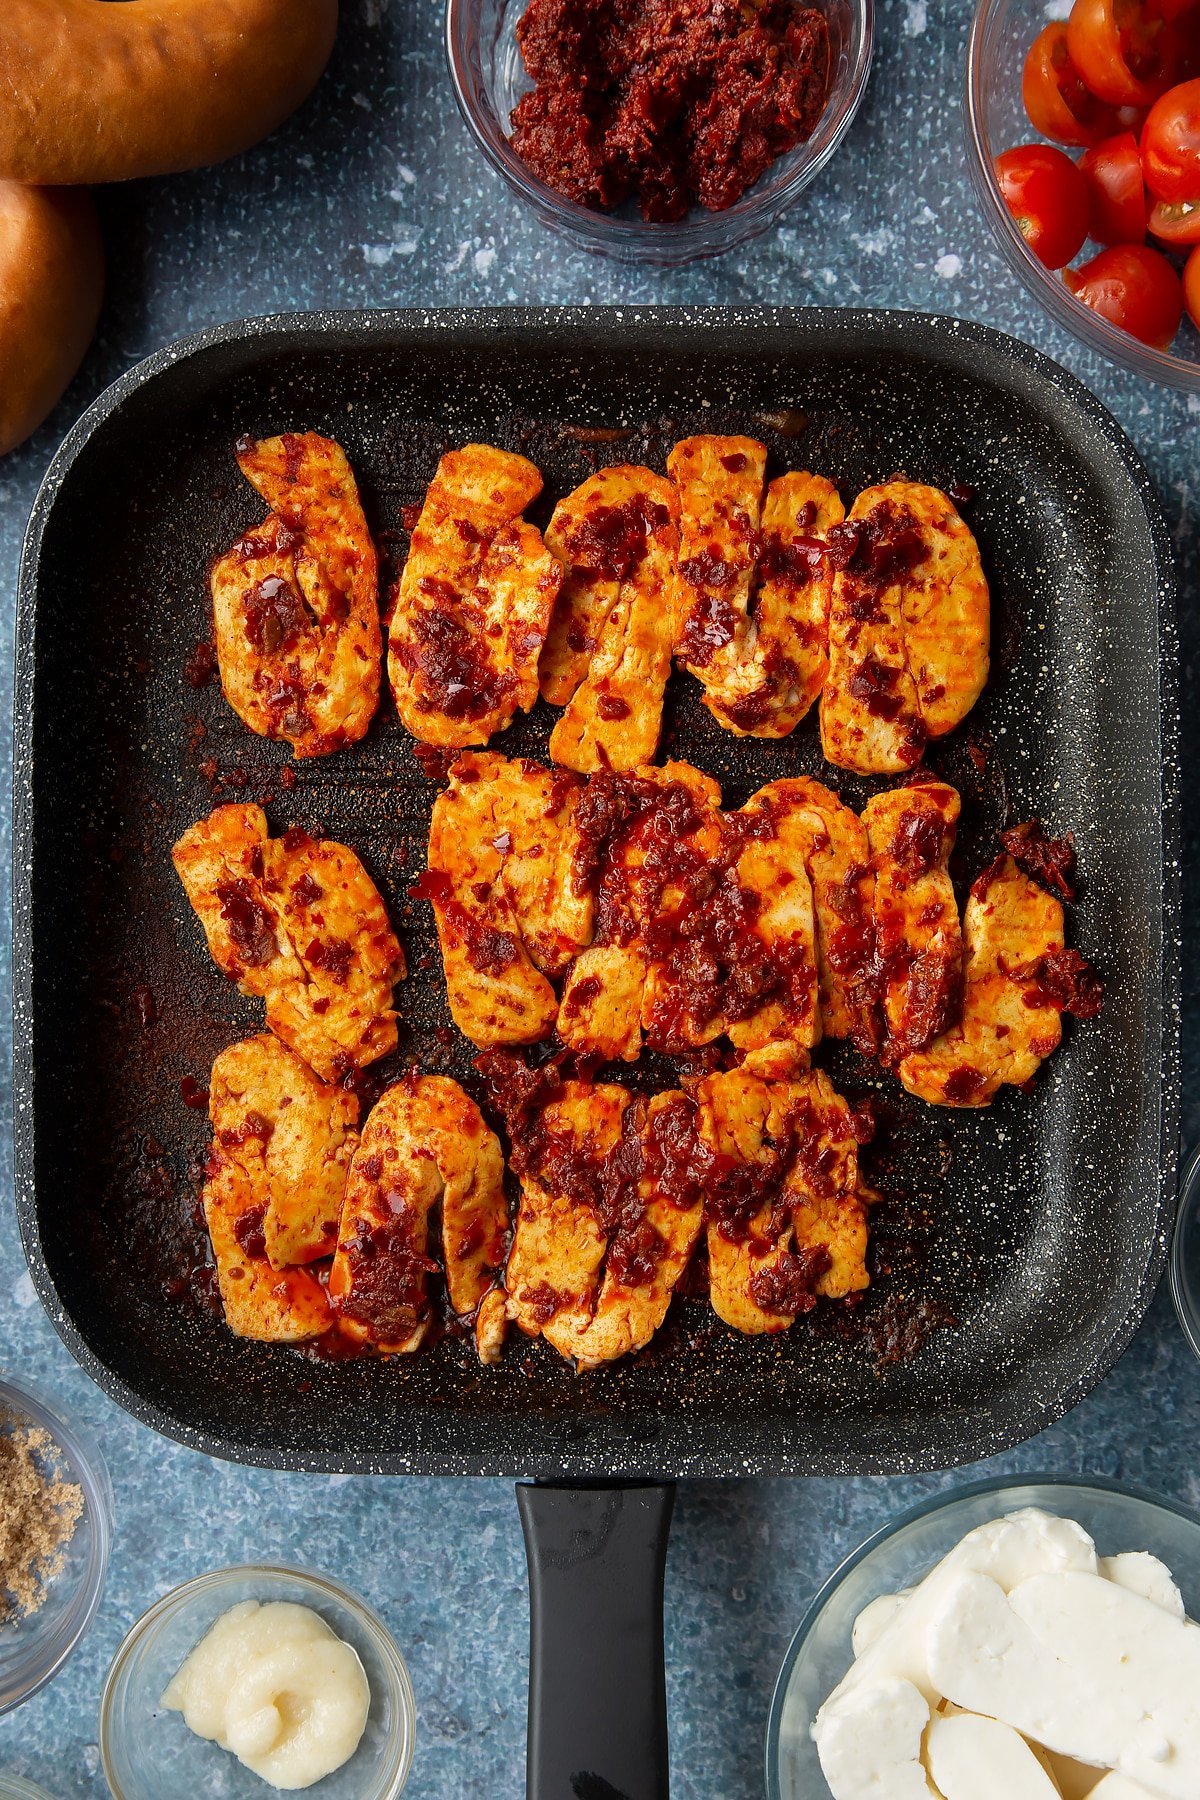 Slices of halloumi brushed with harissa paste and fried in a griddle pan. Ingredients to make halloumi bagels surround the pan.